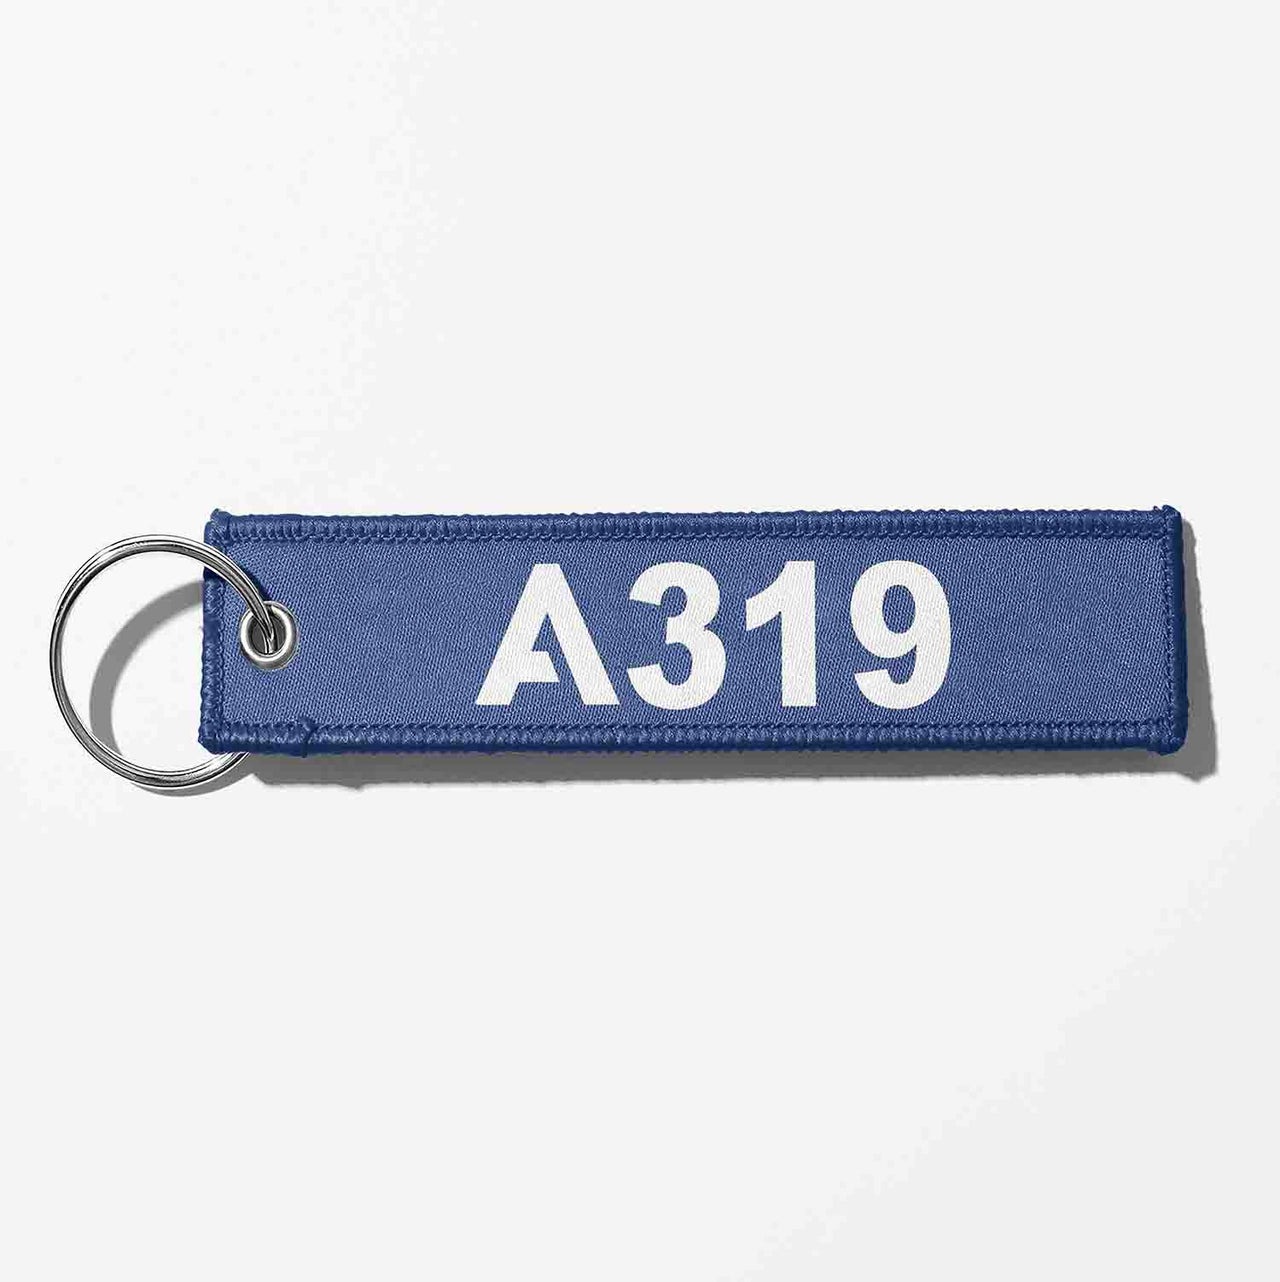 A319 Flat Text Designed Key Chains